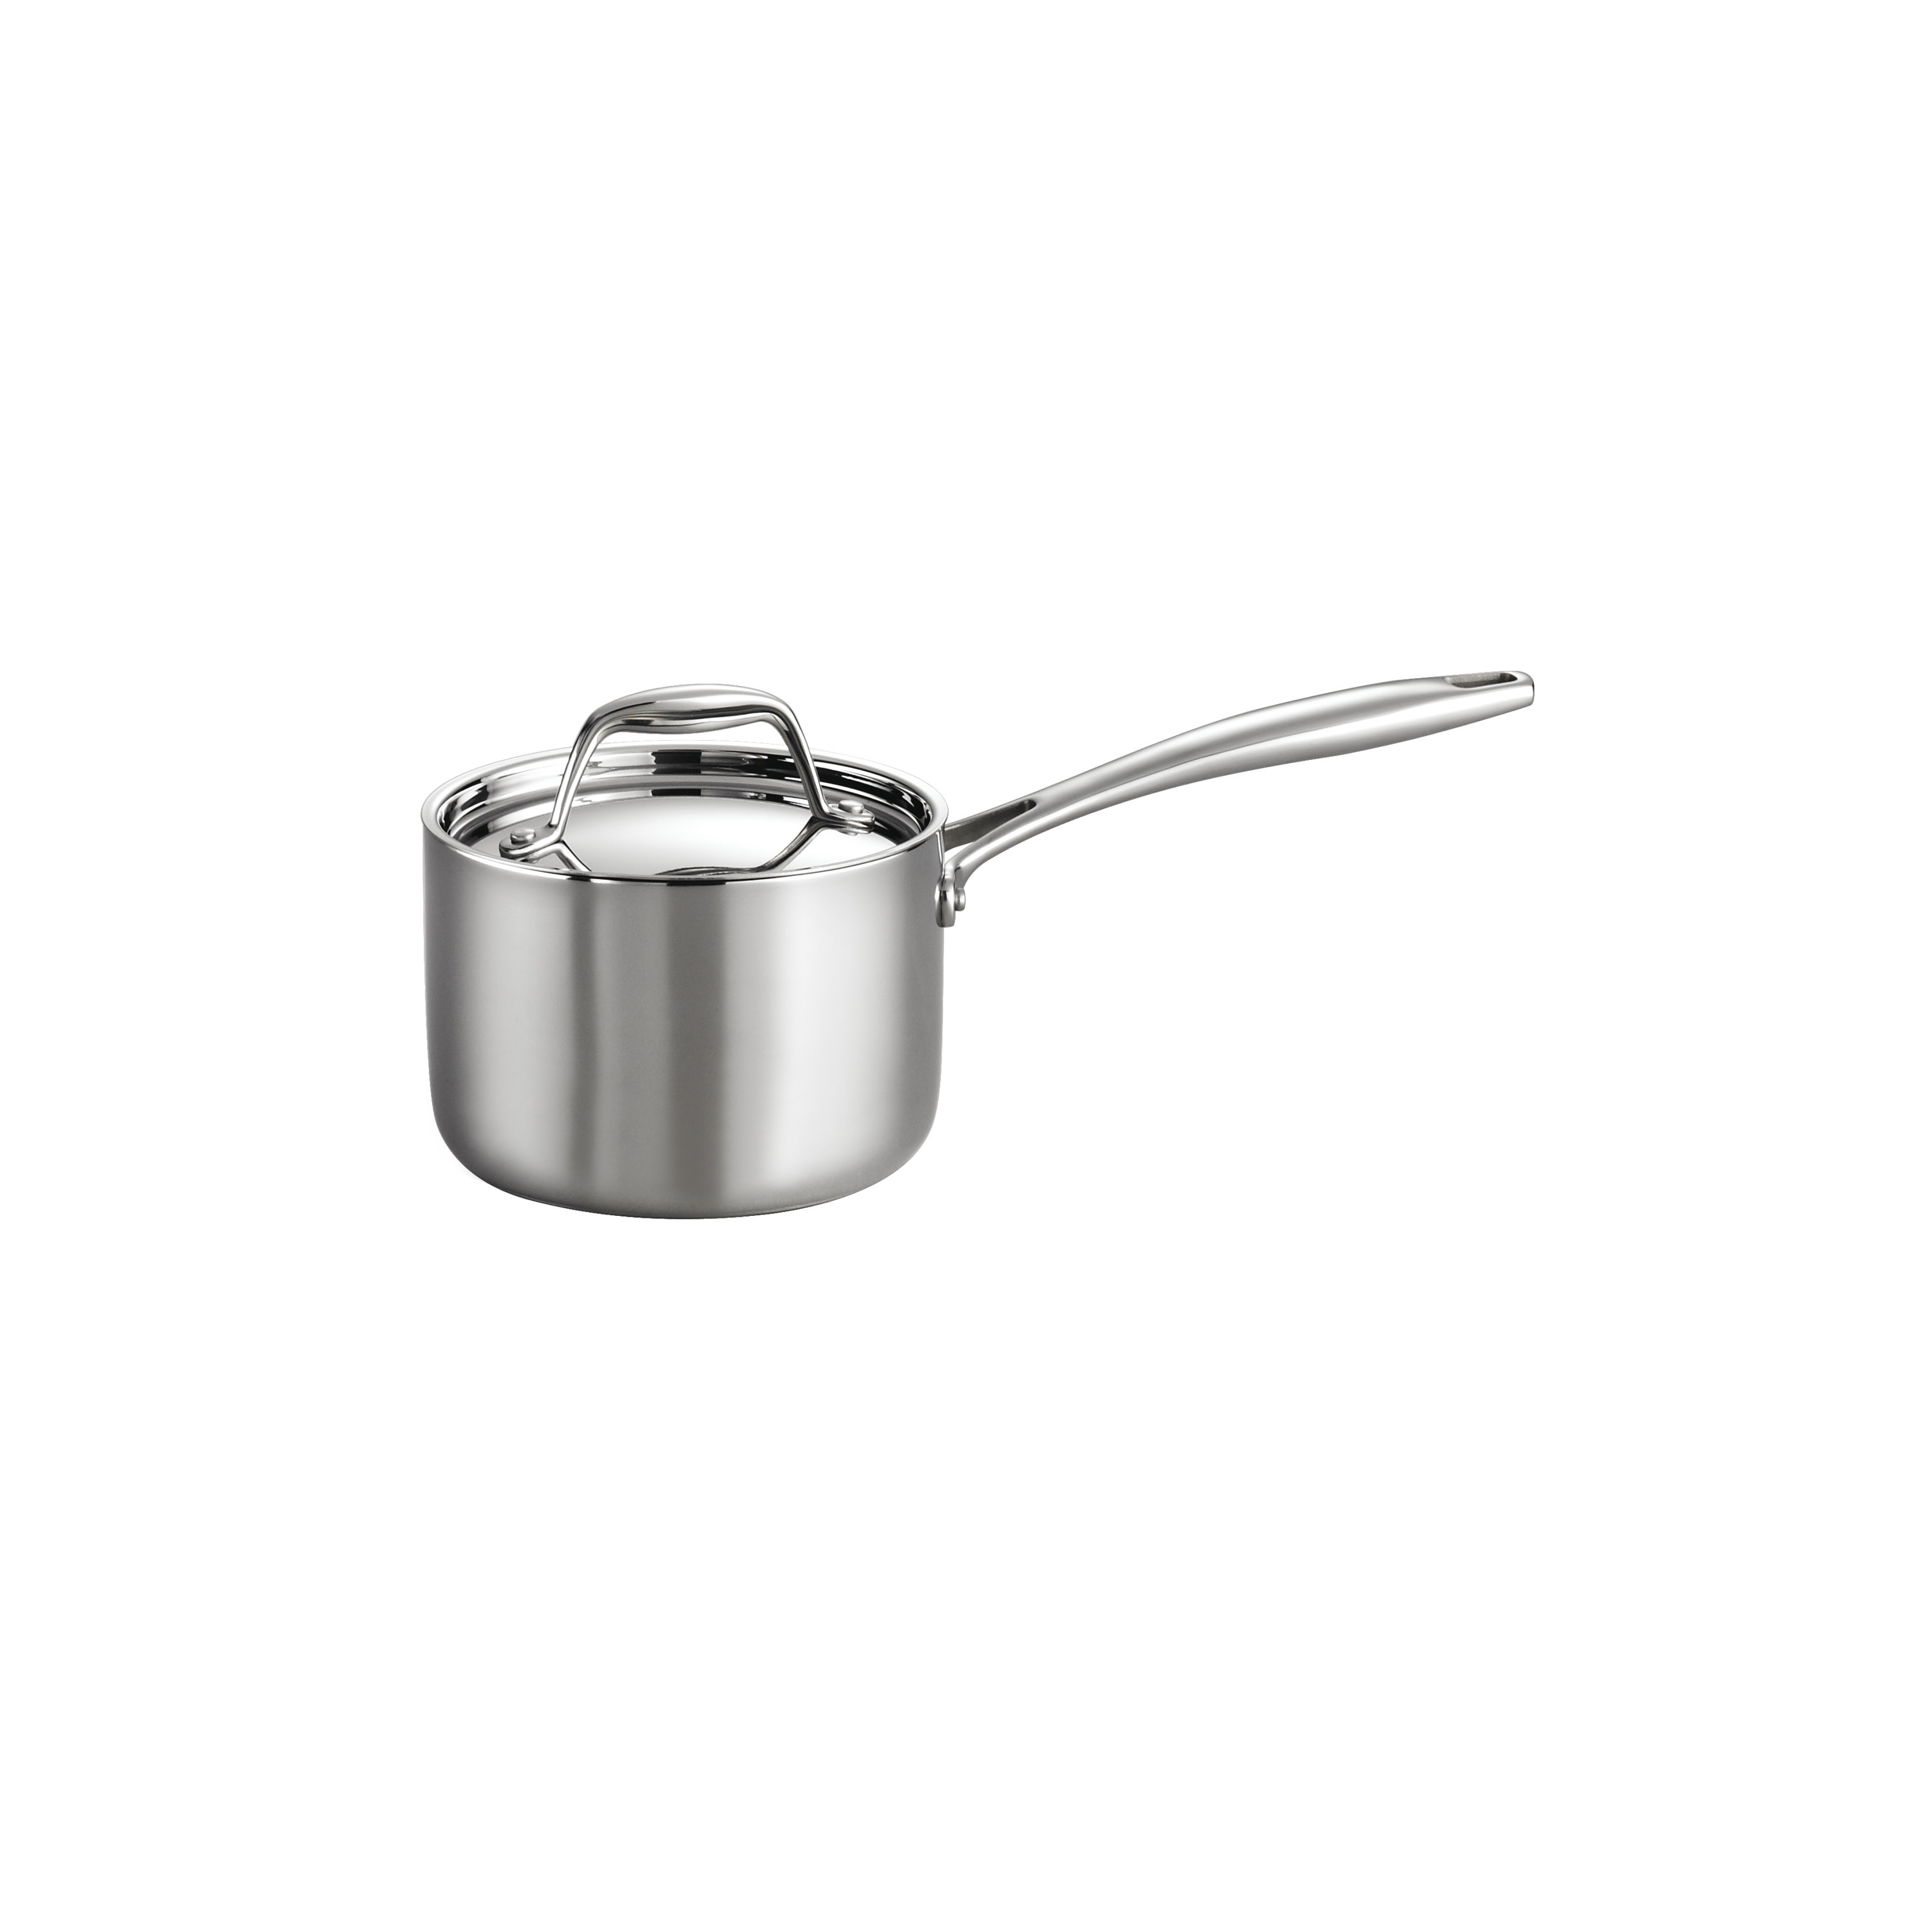 0016017101111 - GOURMET -TRI-PLY CLAD 18/10 STAINLESS STEEL INDUCTION-READY 1.5 IN COVERED SAUCE PAN